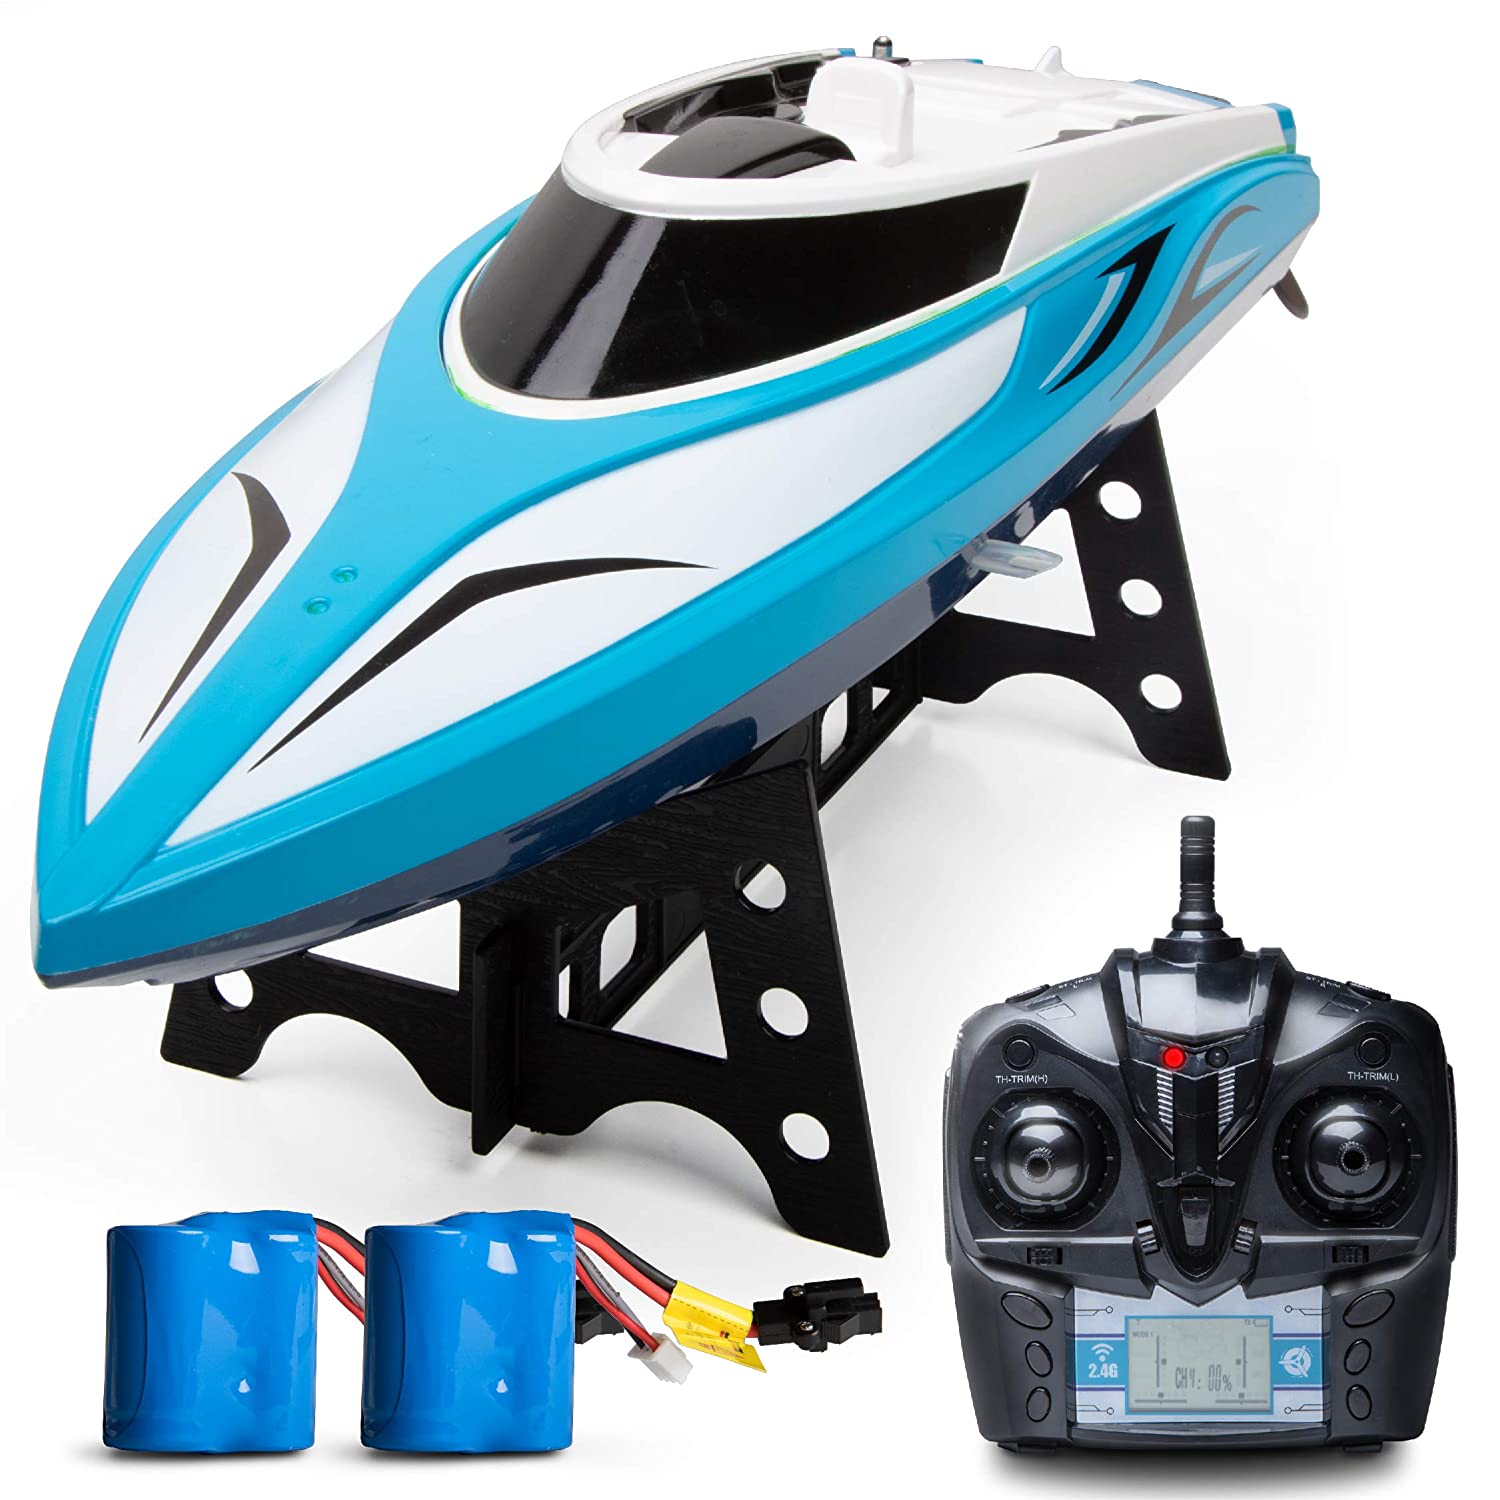 Remote Control Boats for Pools and Lakes